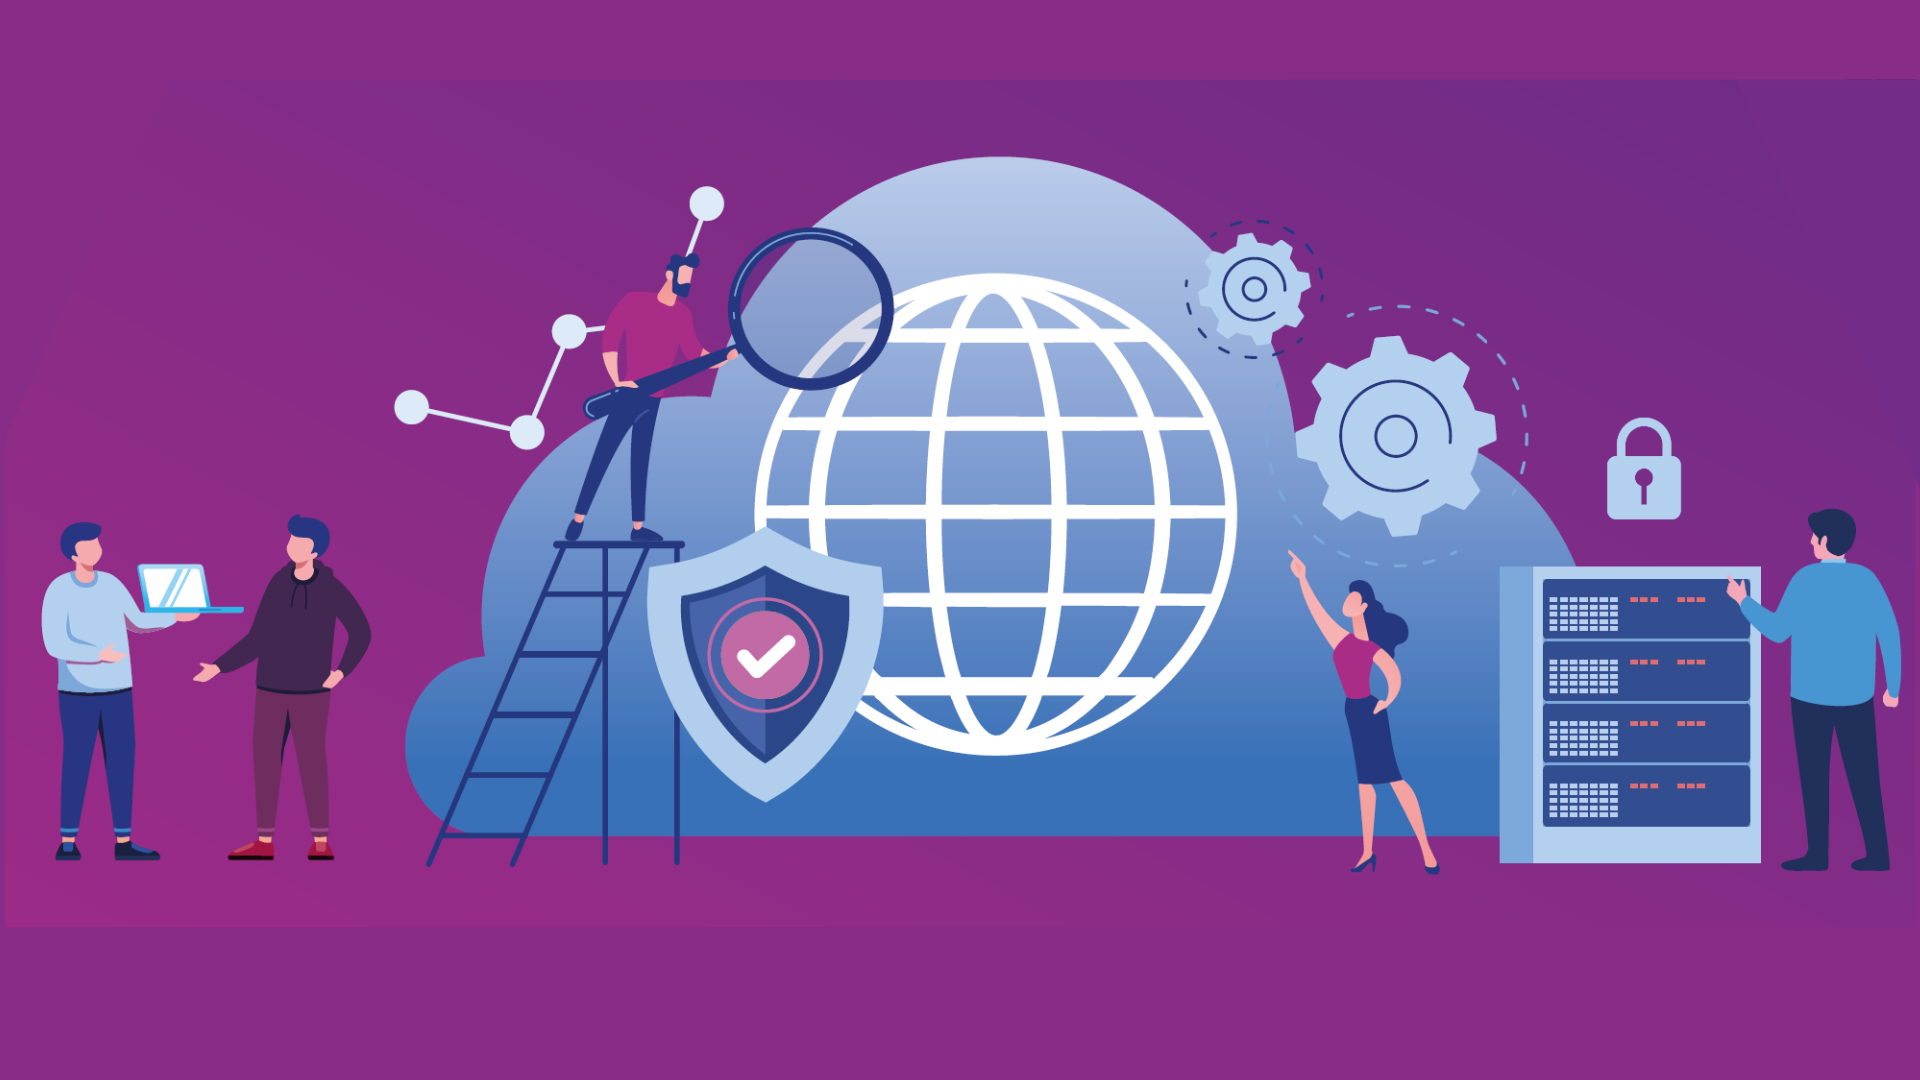 A globe on a cloud with a cyber security shield on a purple background infographic